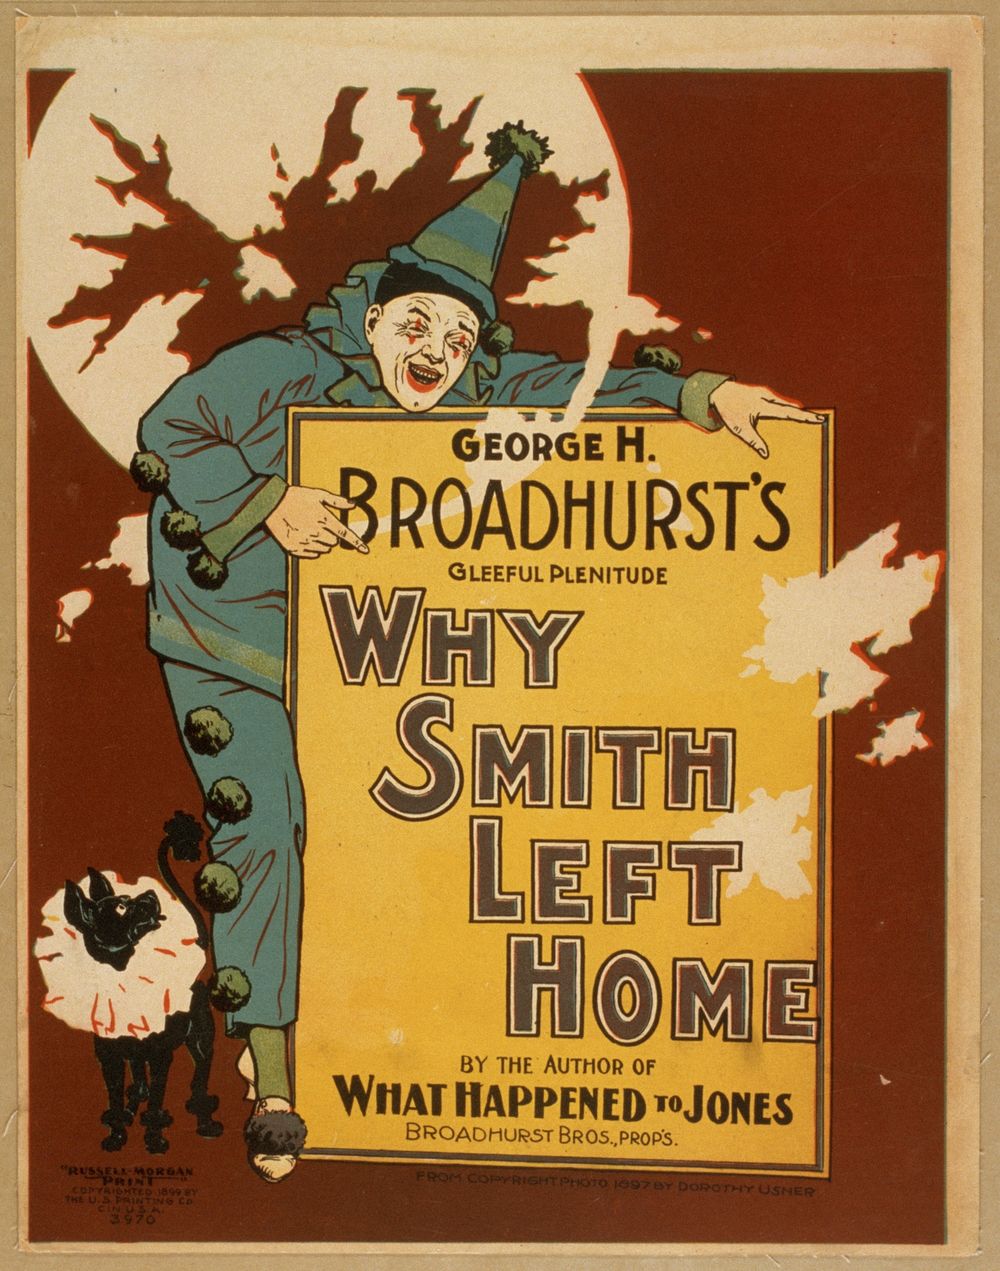 Why Smith left home George H. Broadhurst's gleeful plenitude : by the author of What happened to Jones.